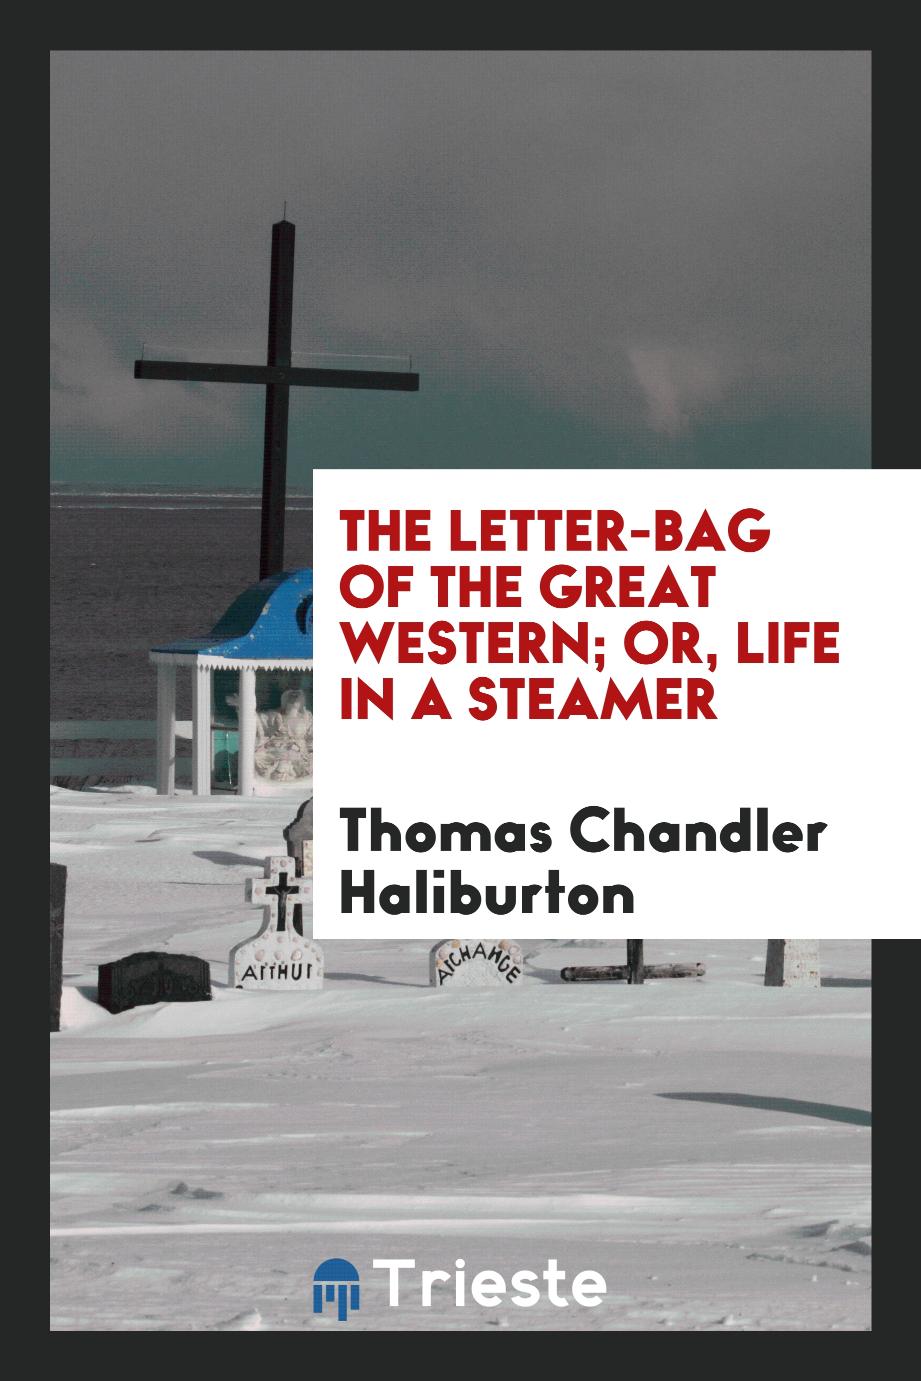 The letter-bag of the great western; or, life in a steamer